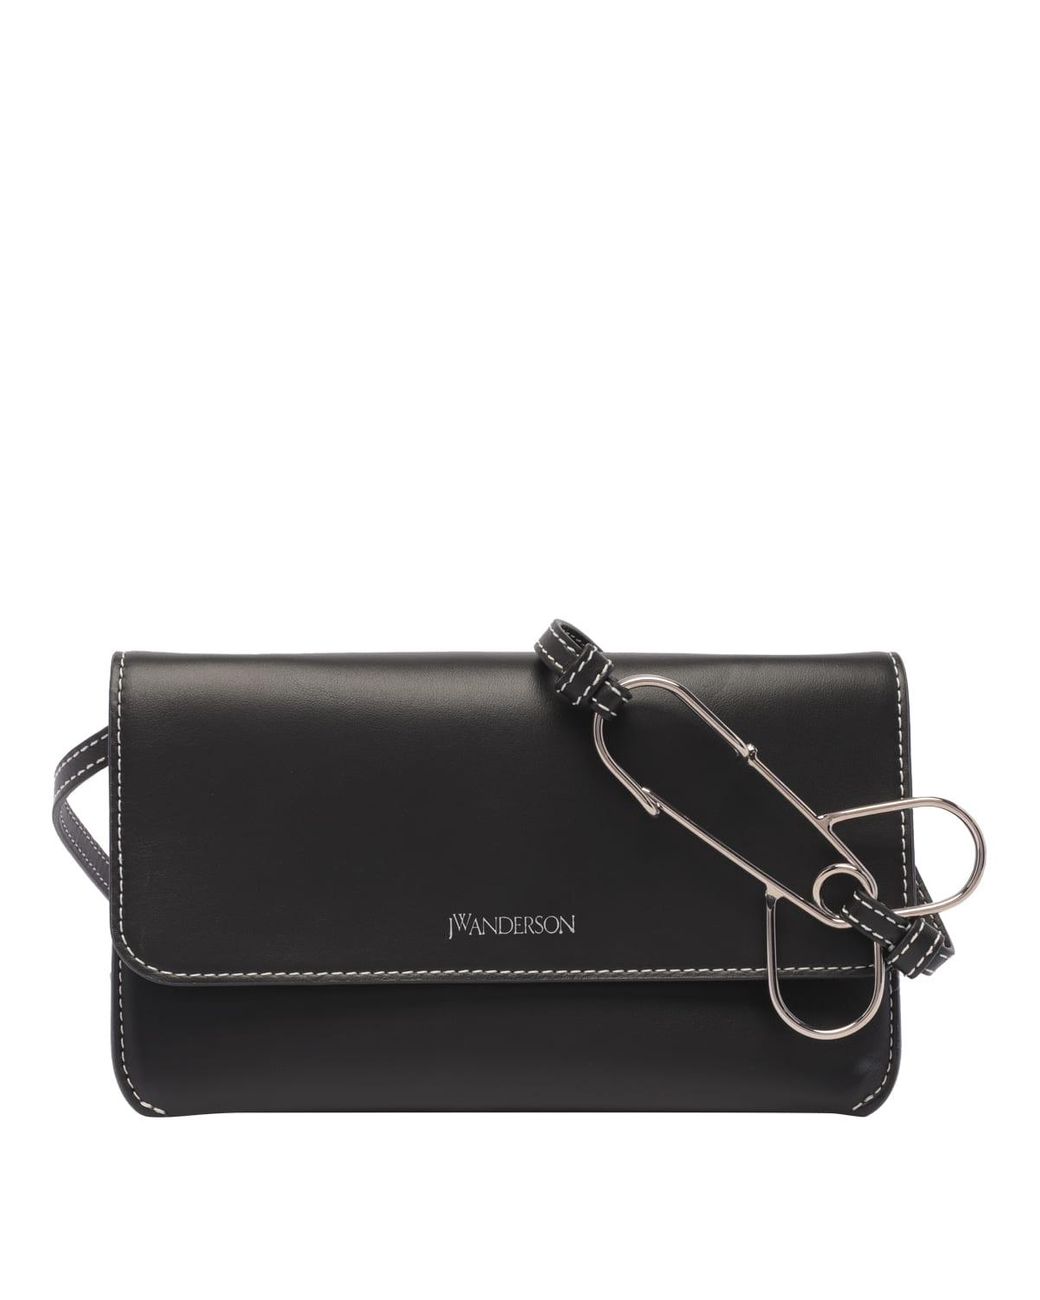 JW Anderson Penis Pin Phone Pouch in Black | Lyst